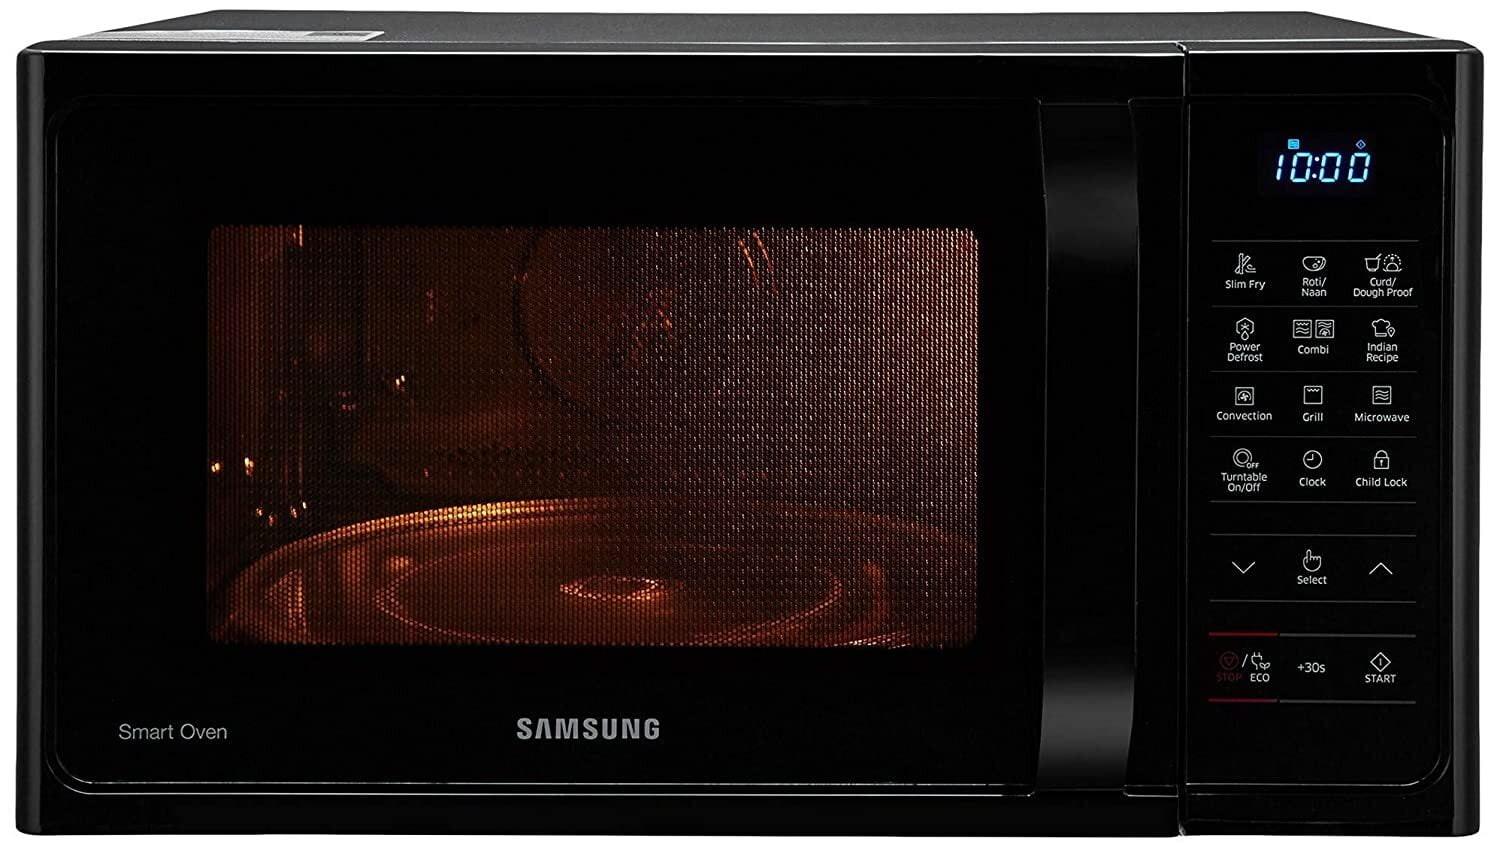 Samsung Smart Oven Feature Dillimall.com04